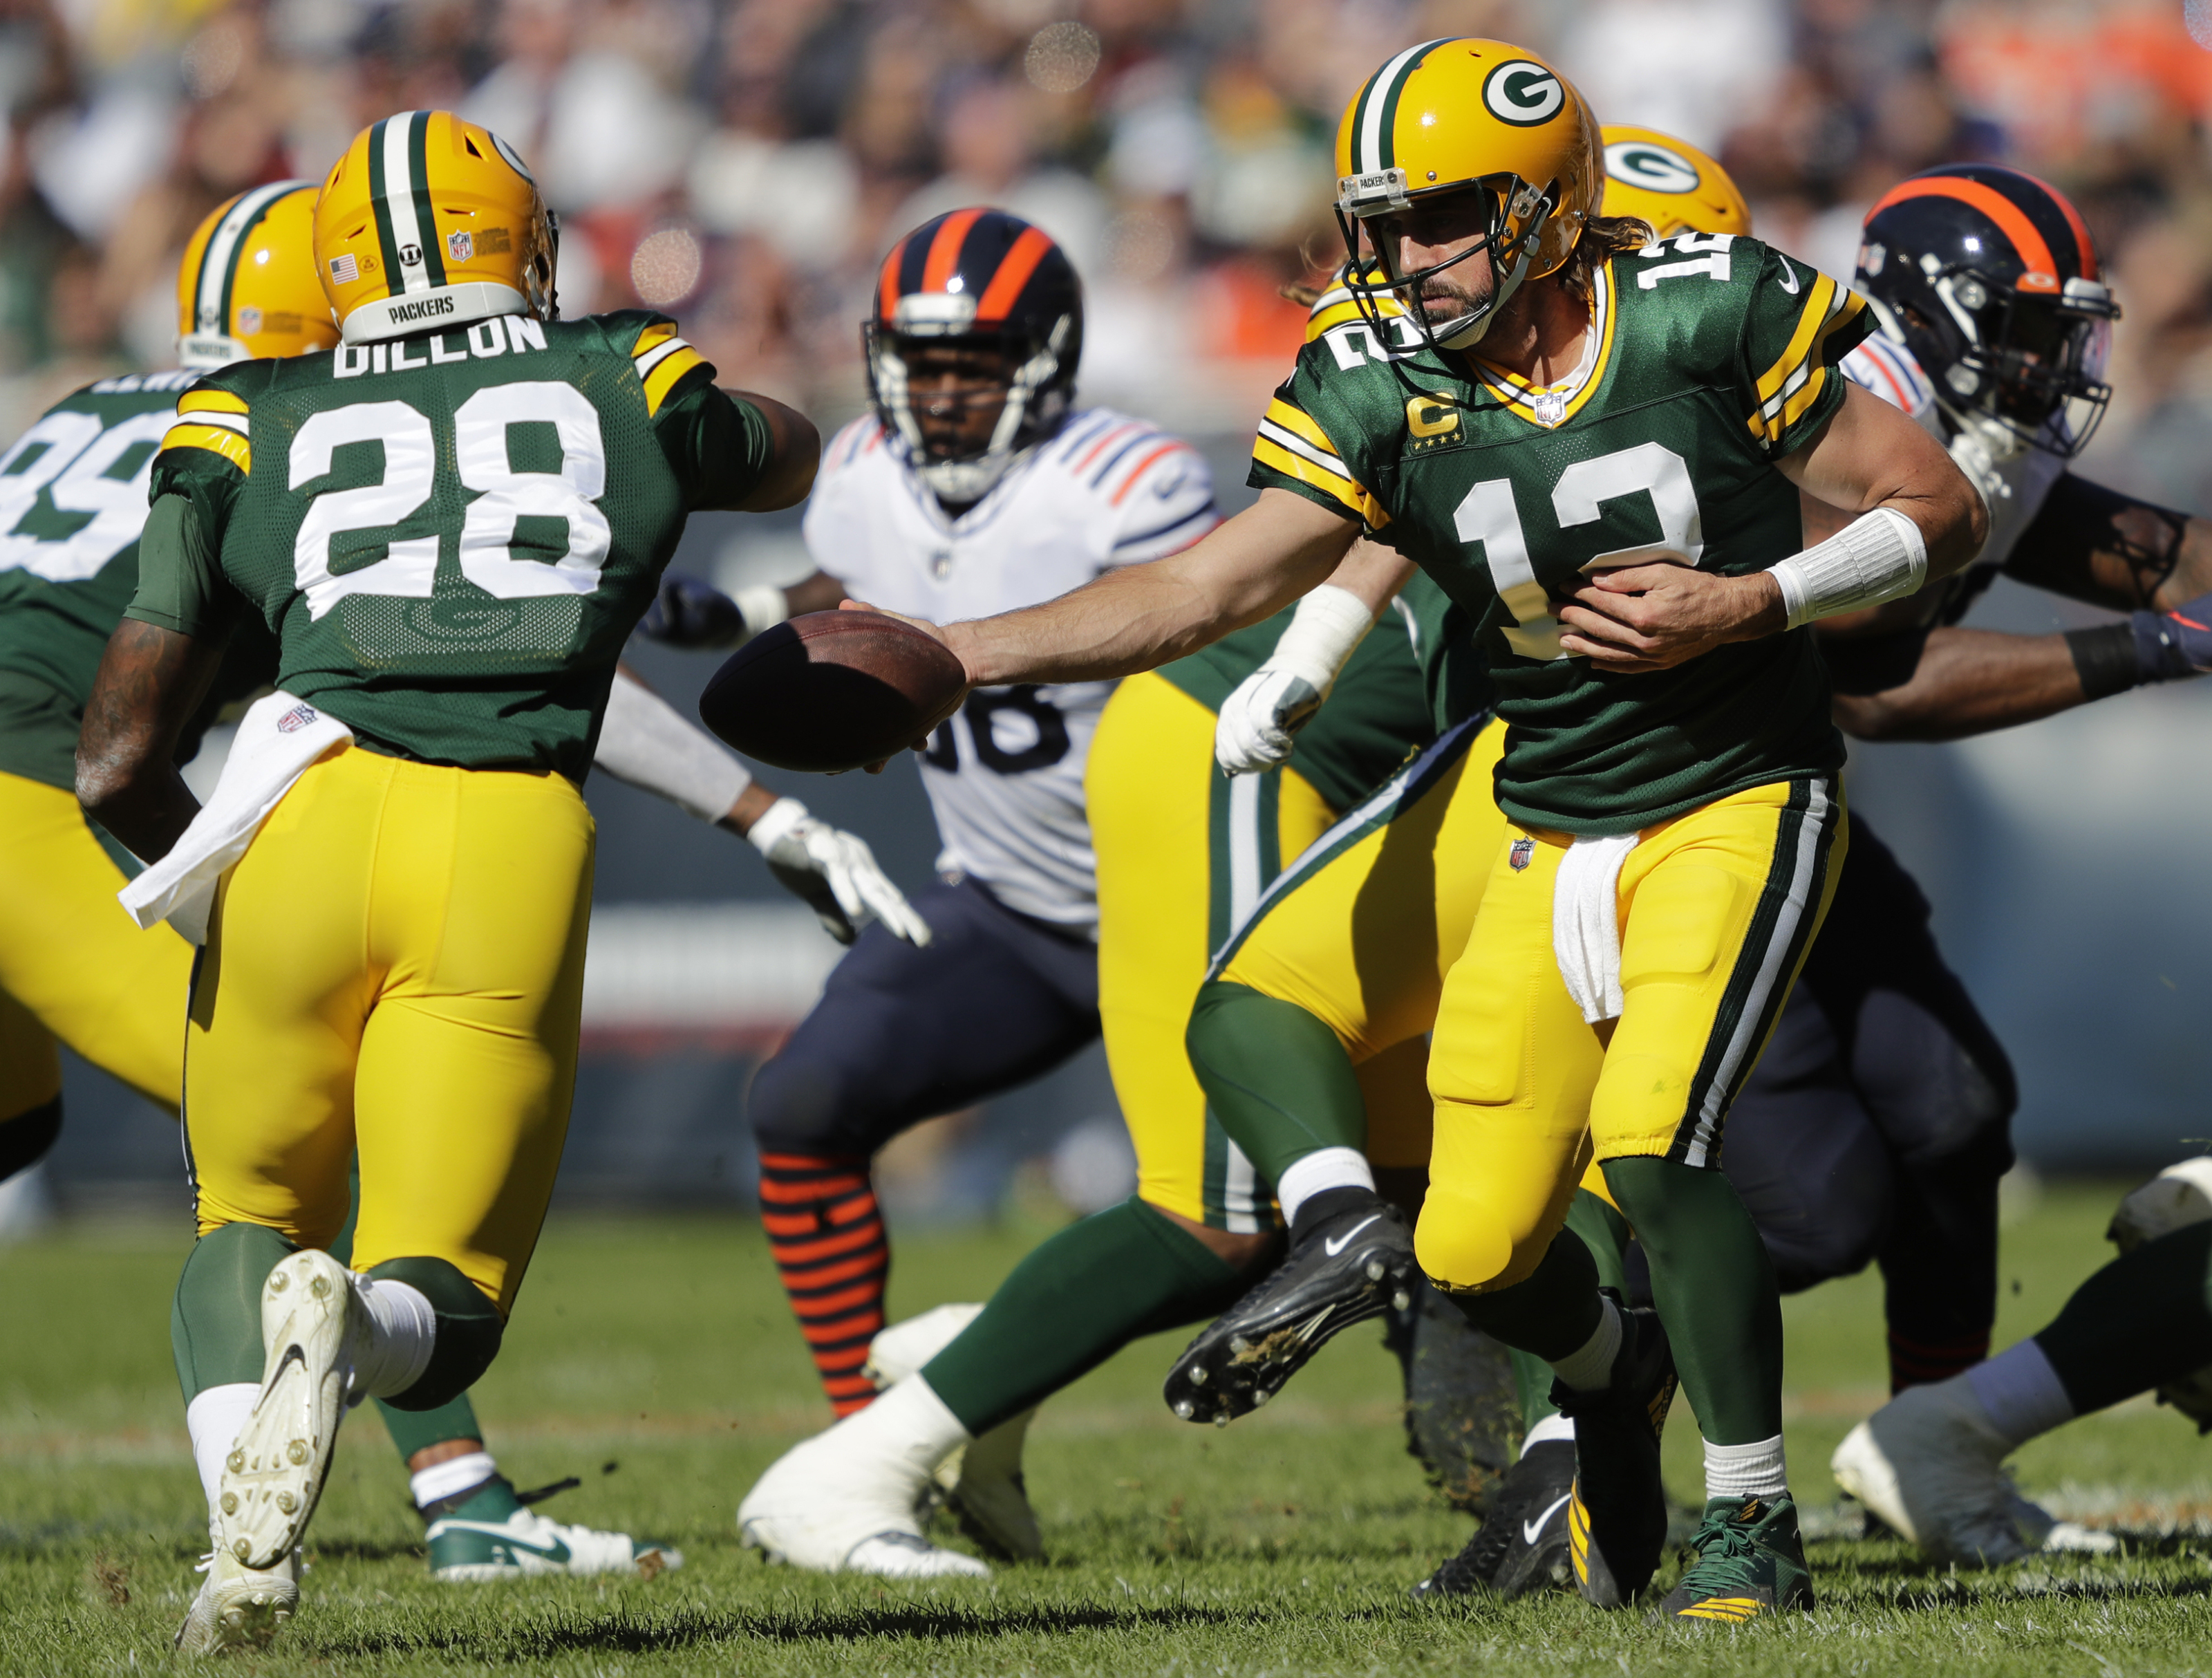 5 Stats to Know about Green Bay Packers vs. Bears in Week 2